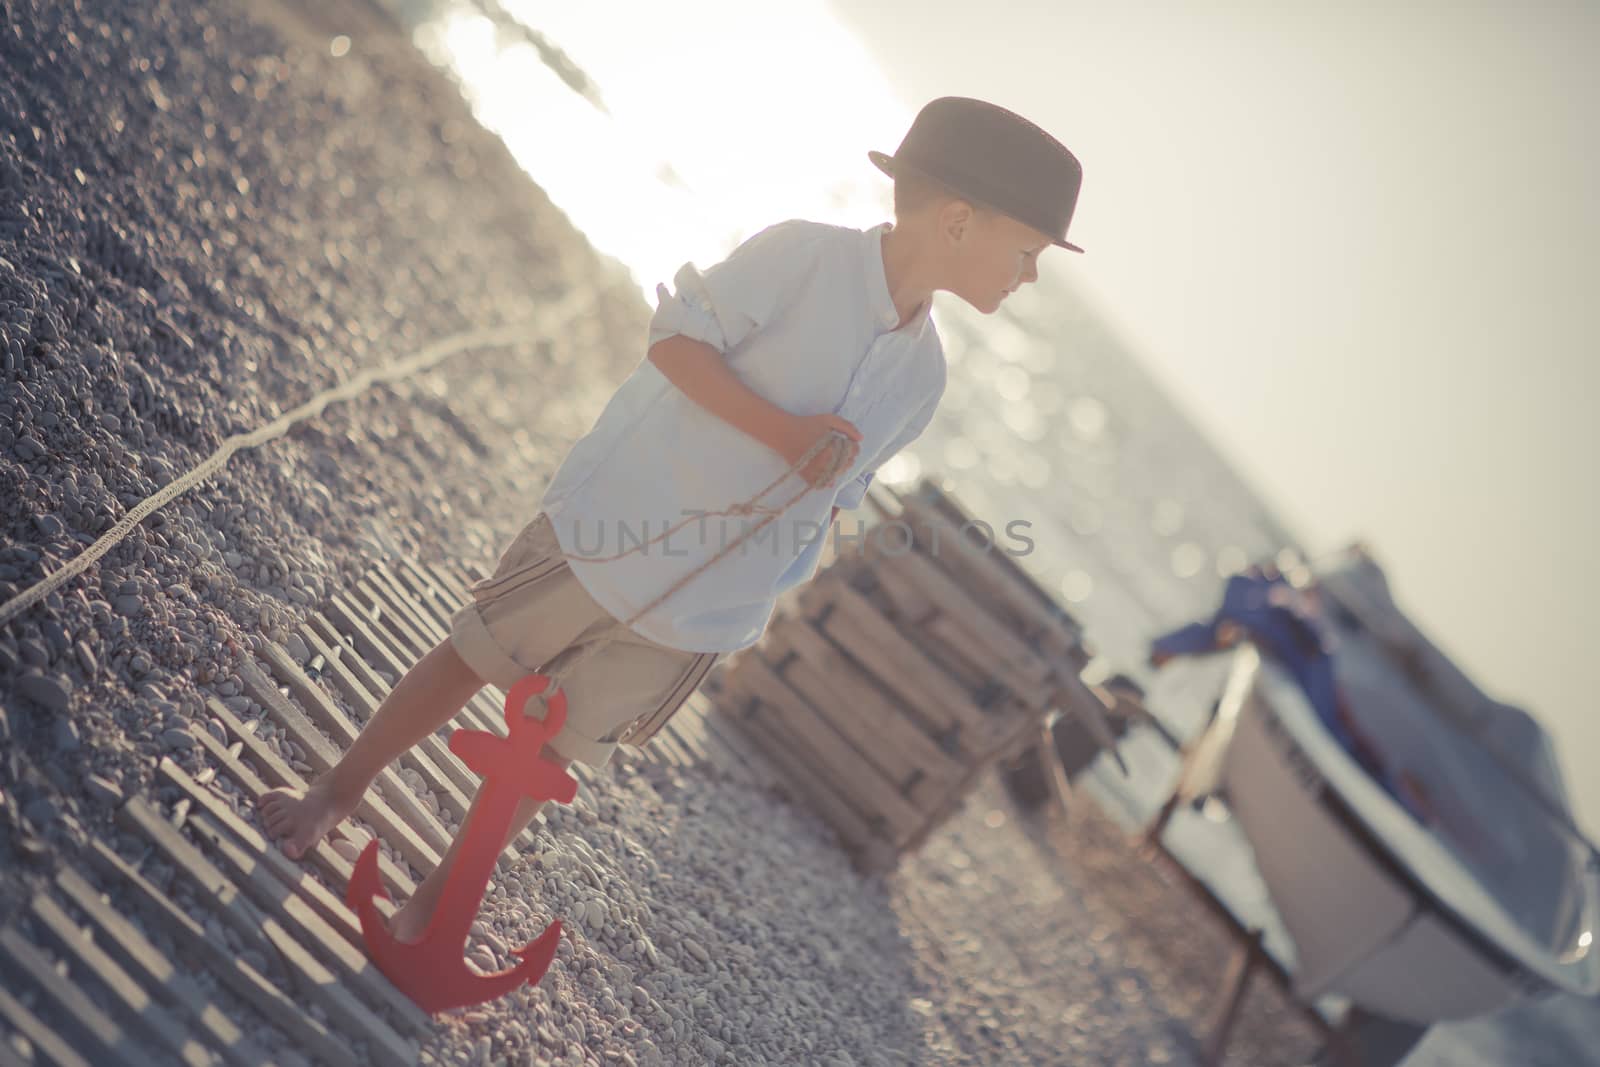 Handsome Nice looking boy on beach walking posing on wooden way wearing fancy stylish blue shirt and shorts with gallows and gentleman hat enjoy summer time alone on awesome ocean with anchor.